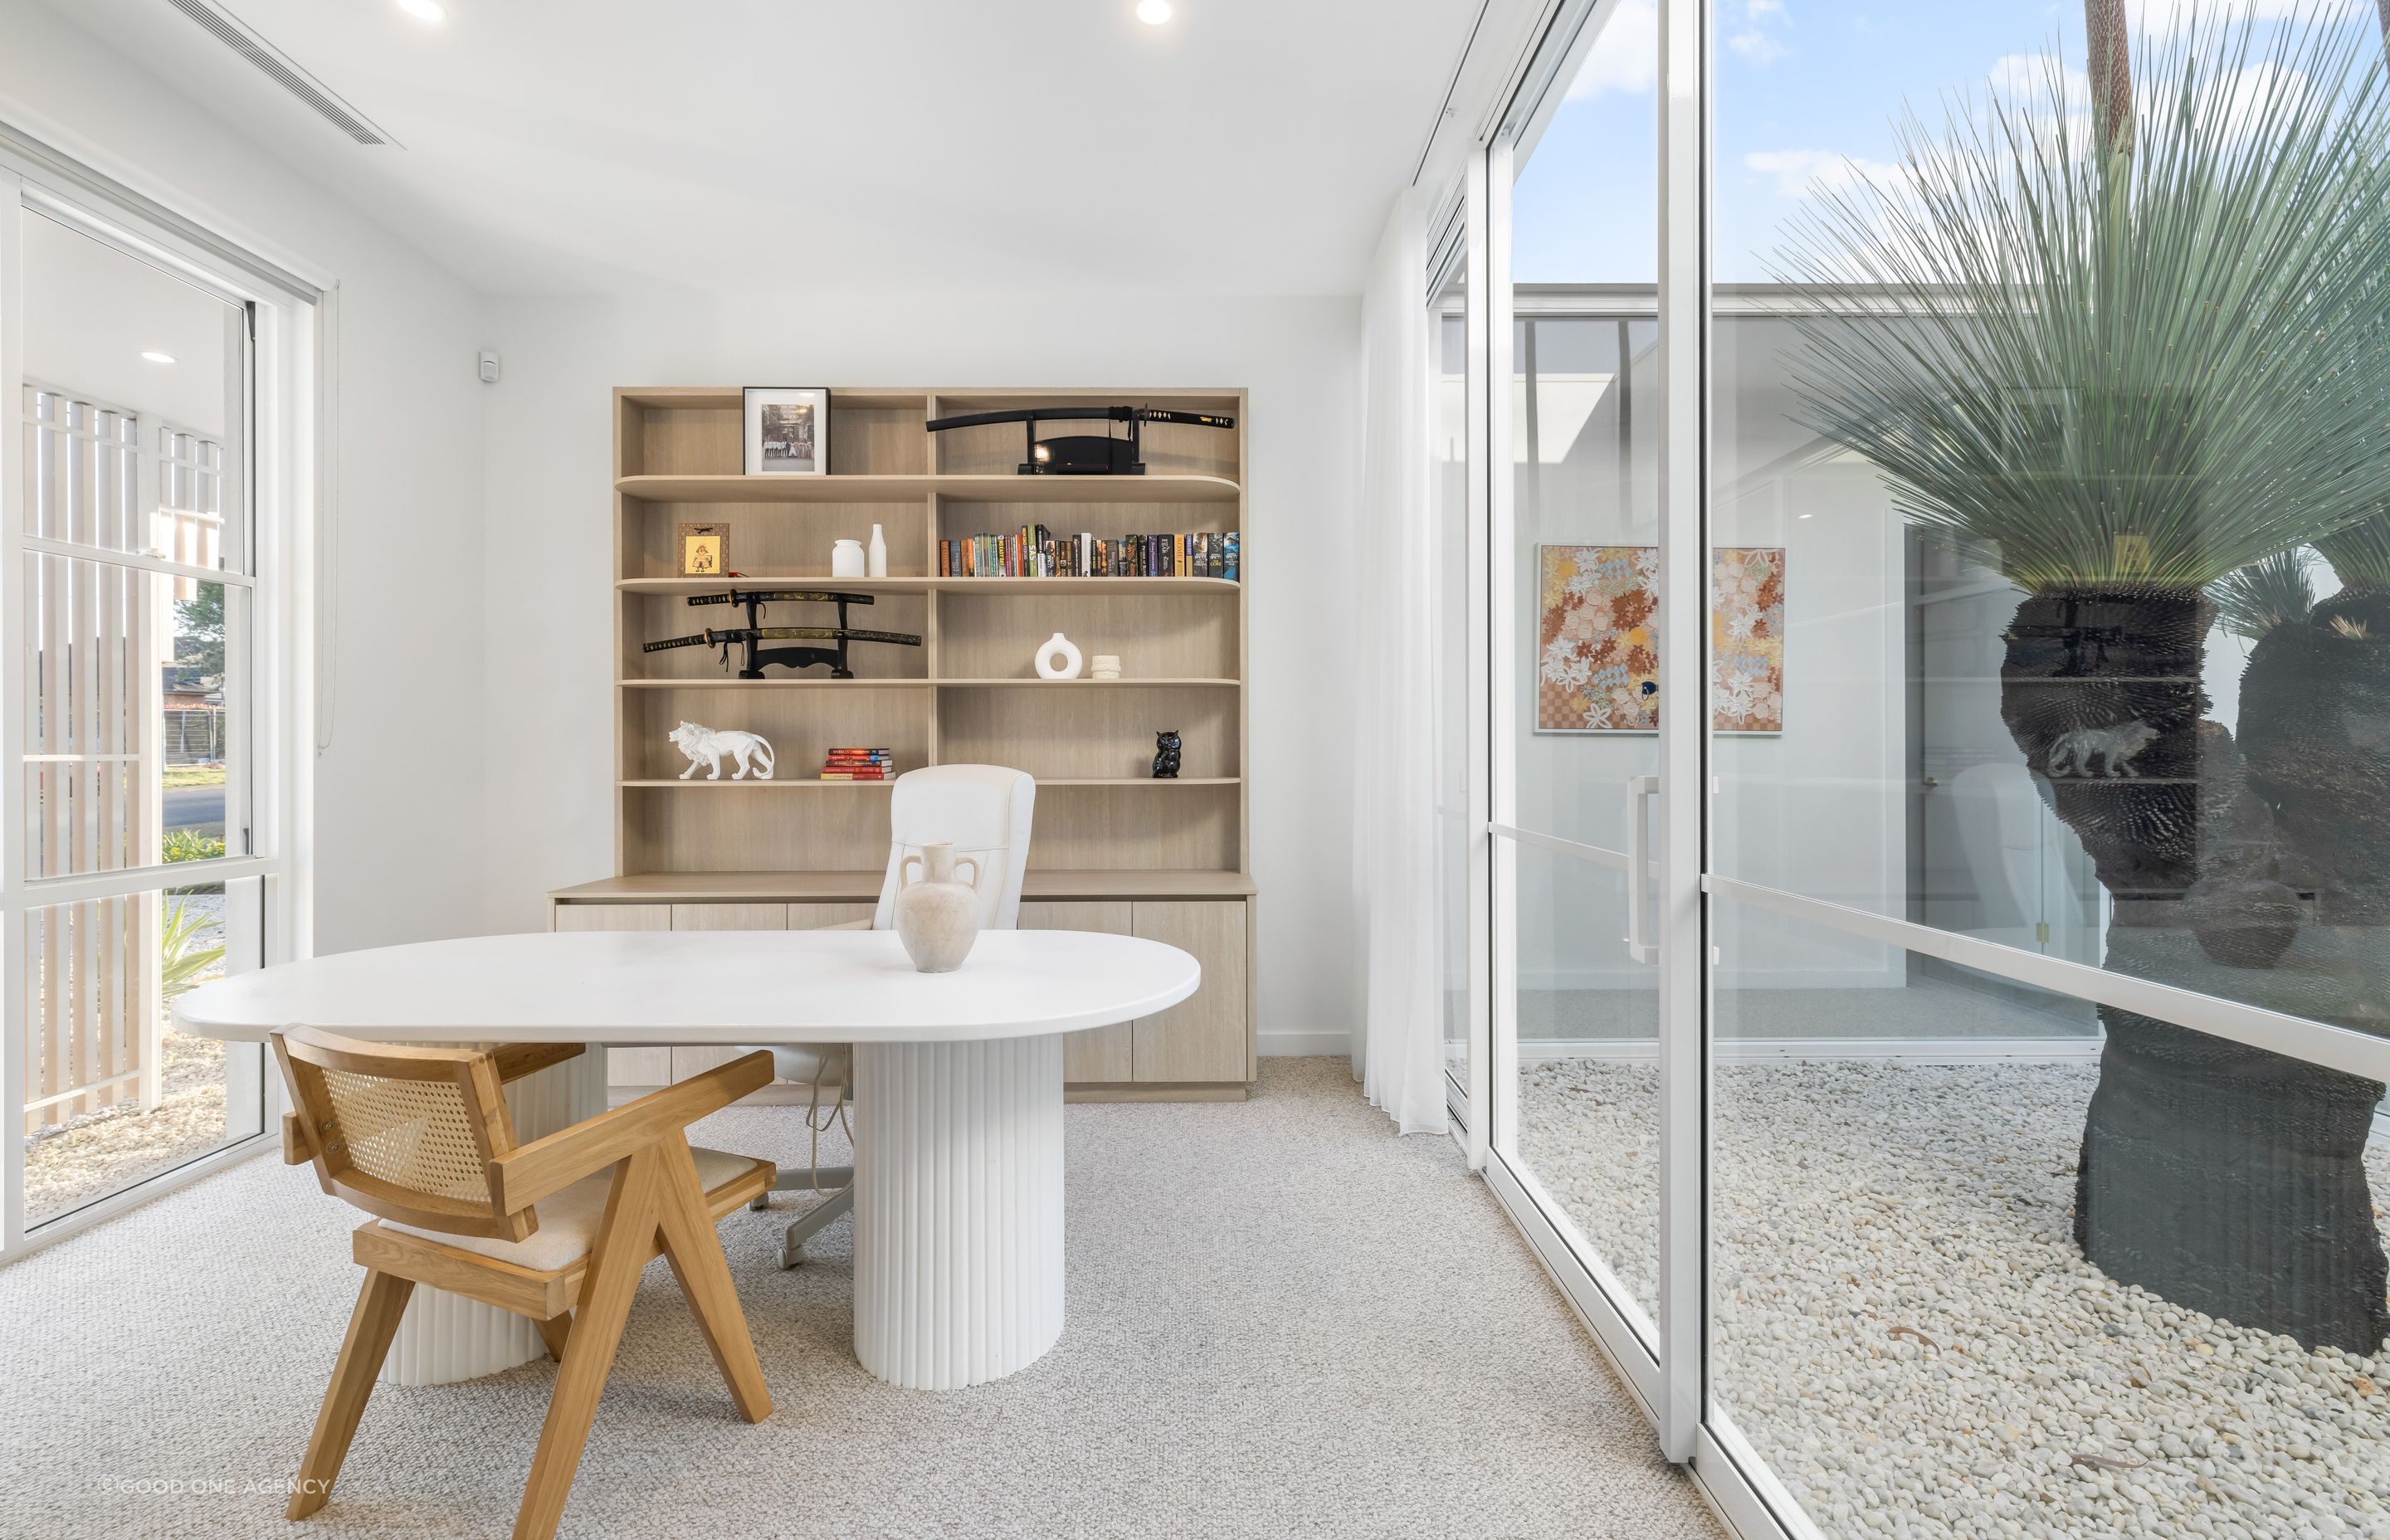 The study near the front of the house takes its light from an internal courtyard, enjoying a view of the grass tree.